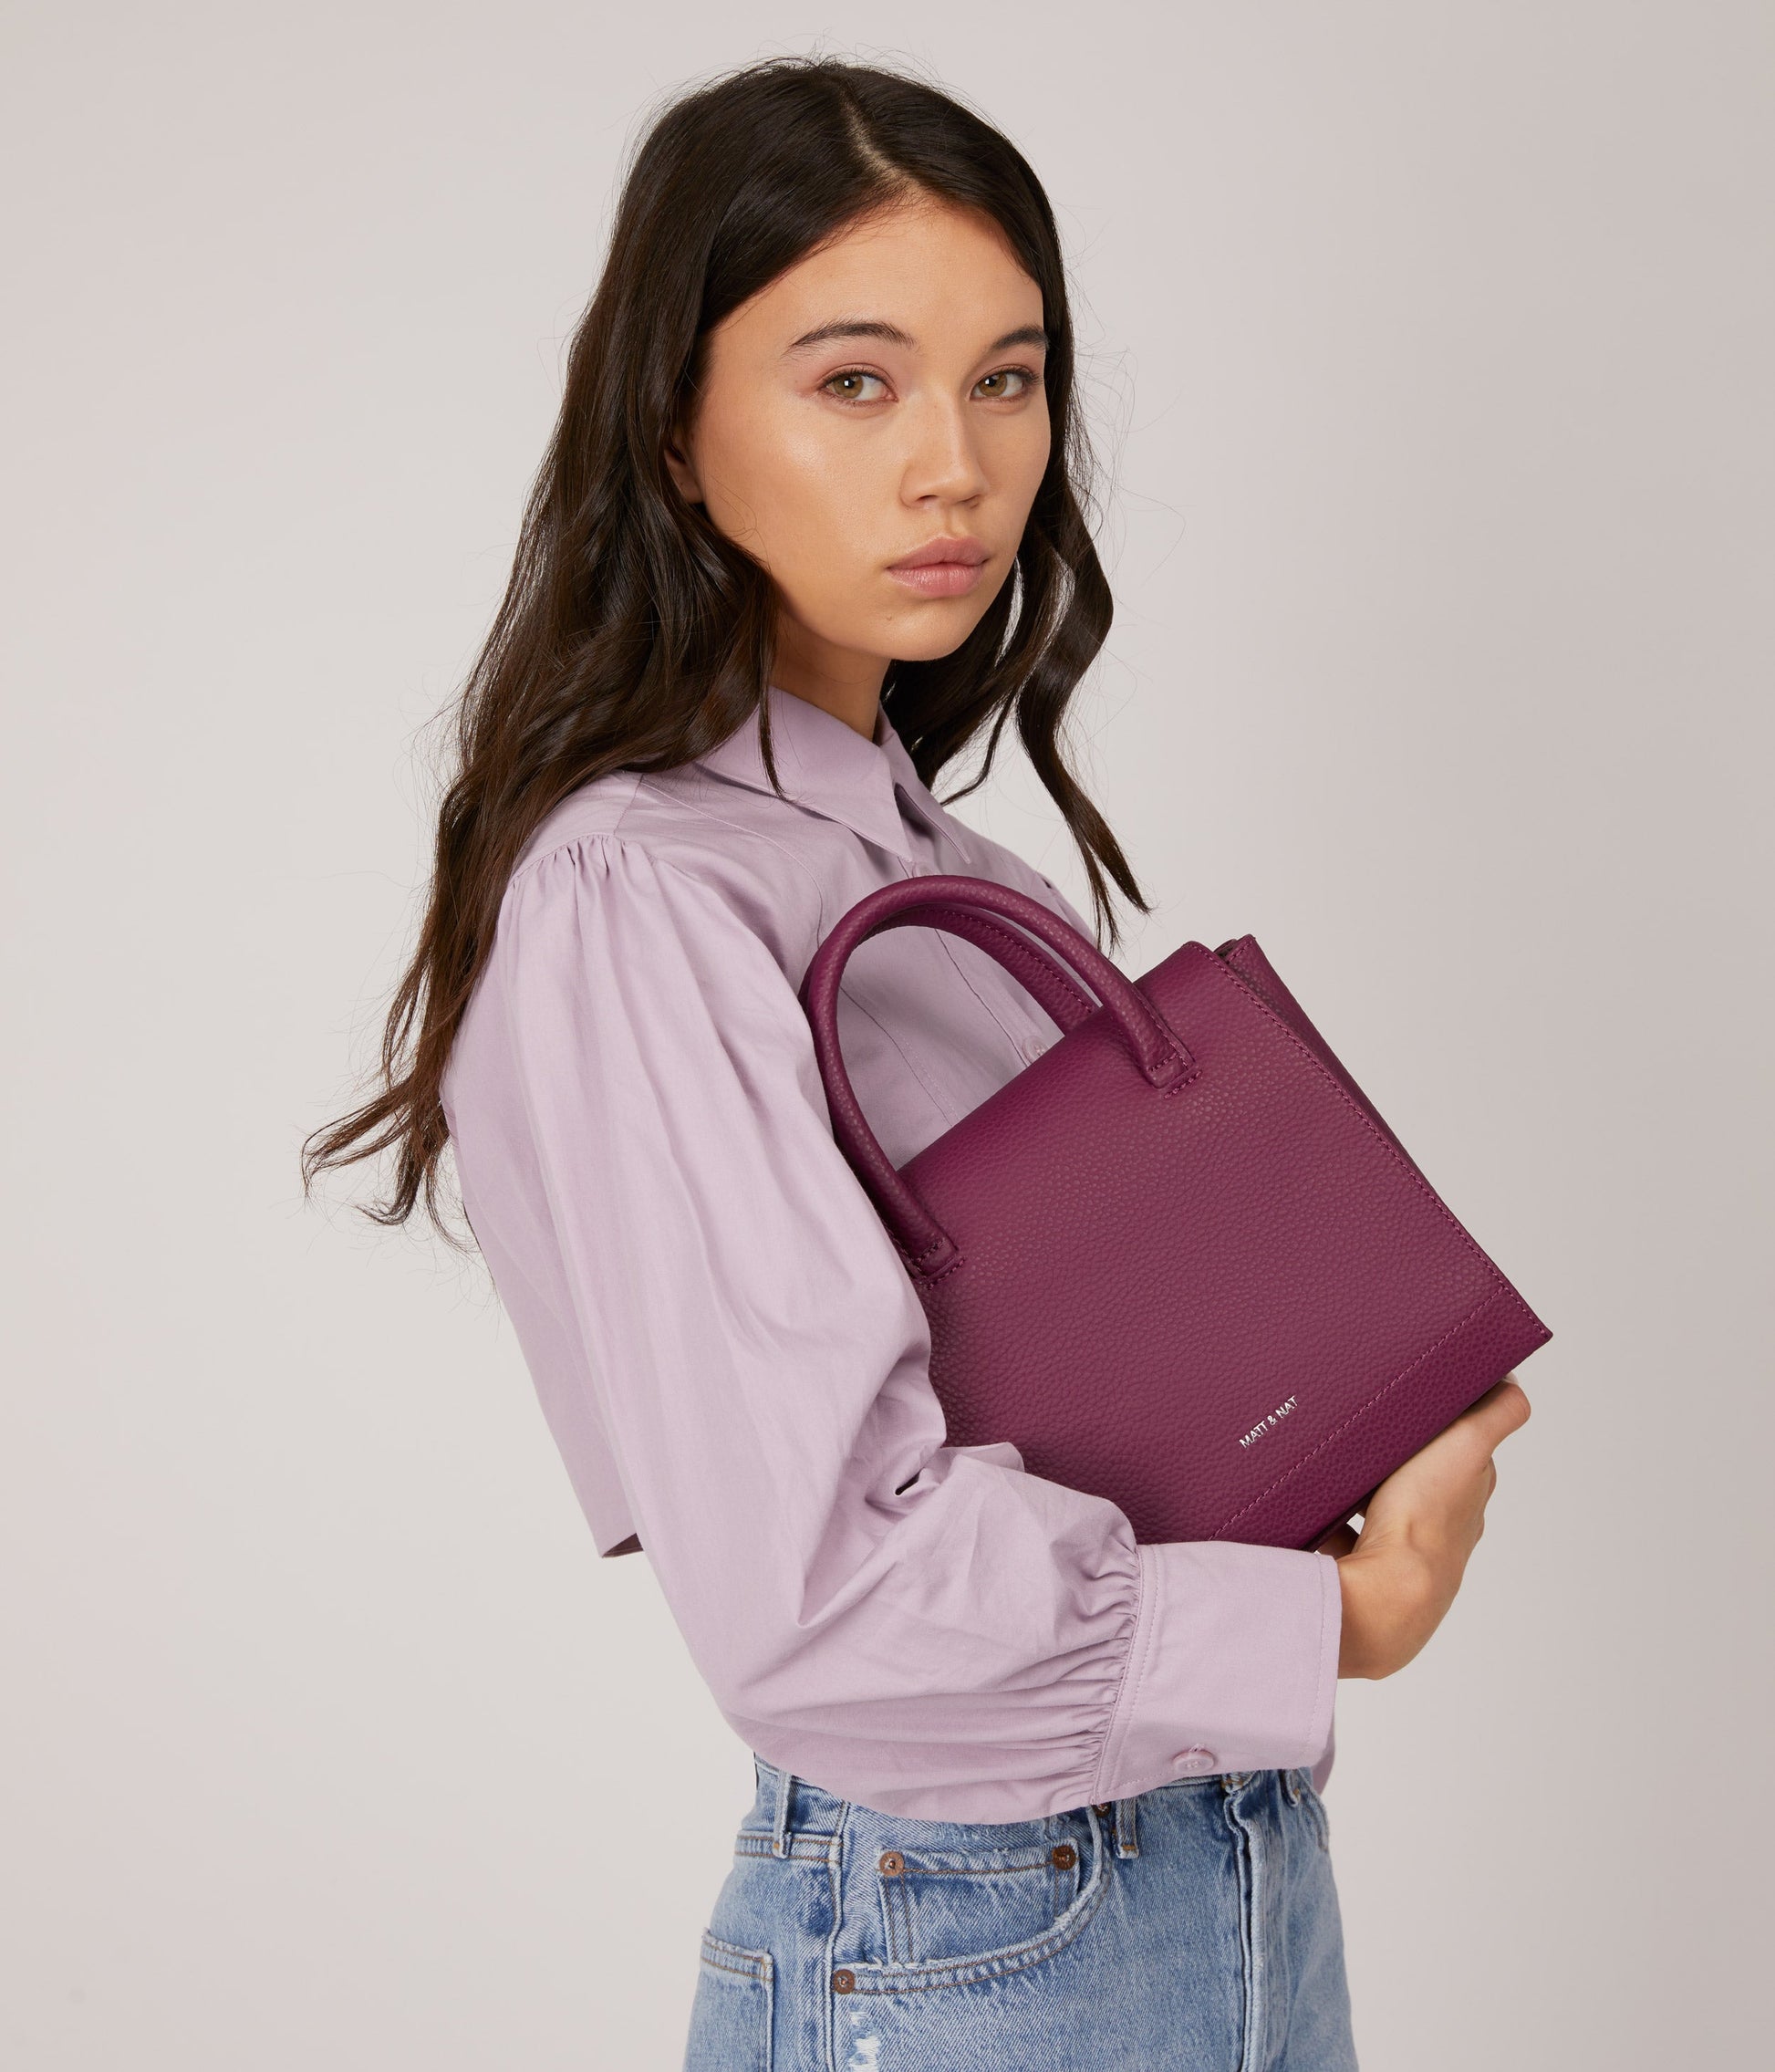 ADELSM Small Vegan Satchel - Purity | Color: Pink - variant::rose